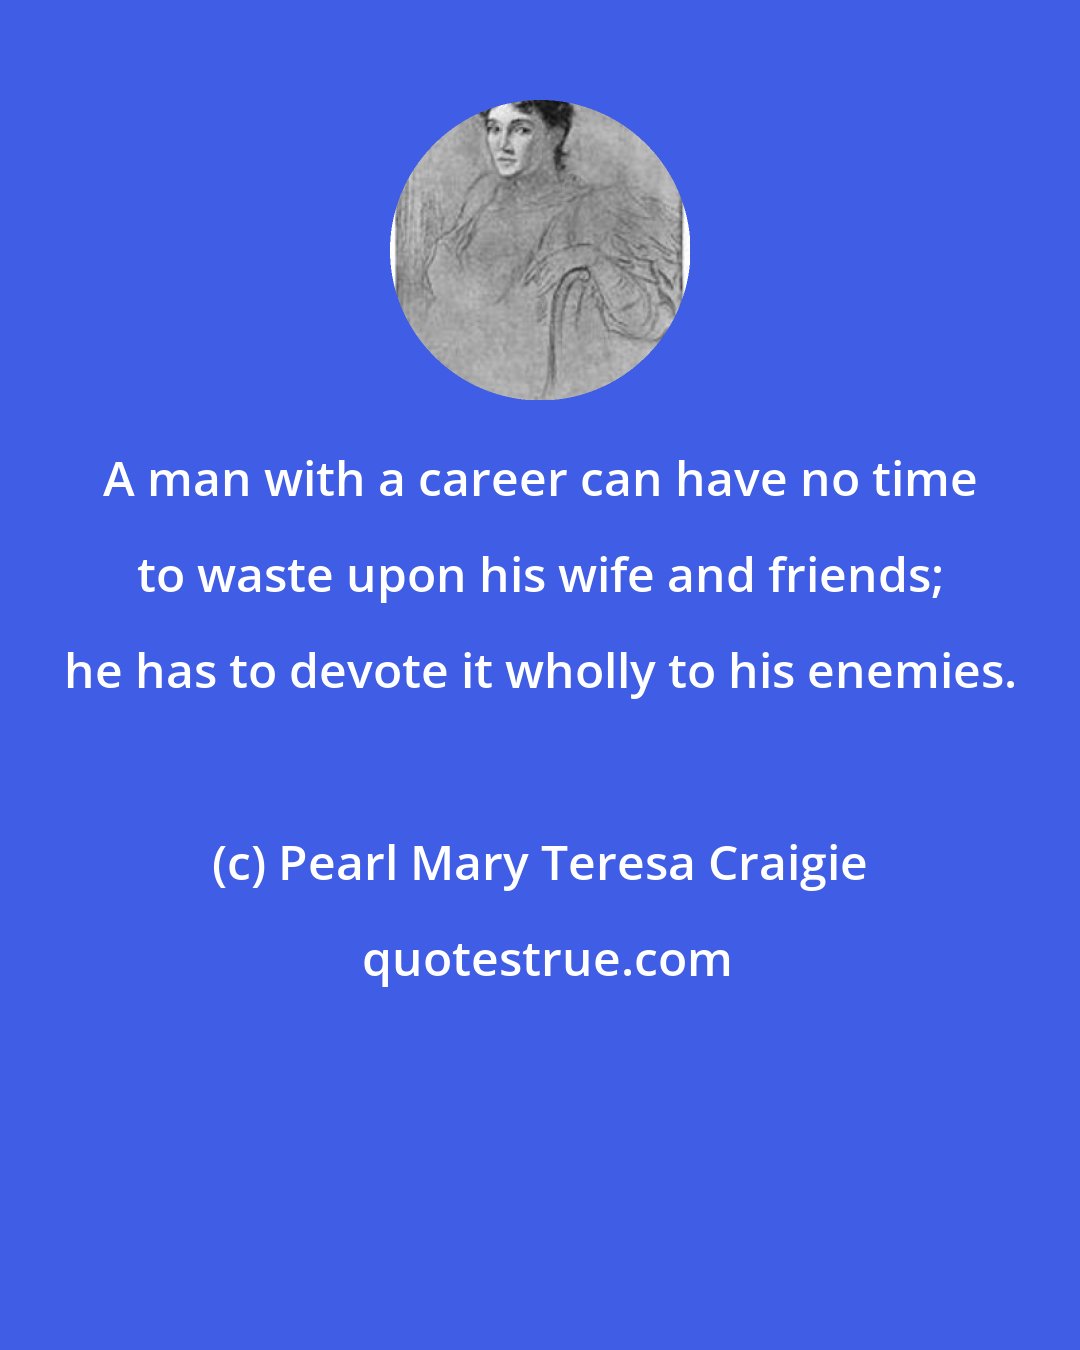 Pearl Mary Teresa Craigie: A man with a career can have no time to waste upon his wife and friends; he has to devote it wholly to his enemies.